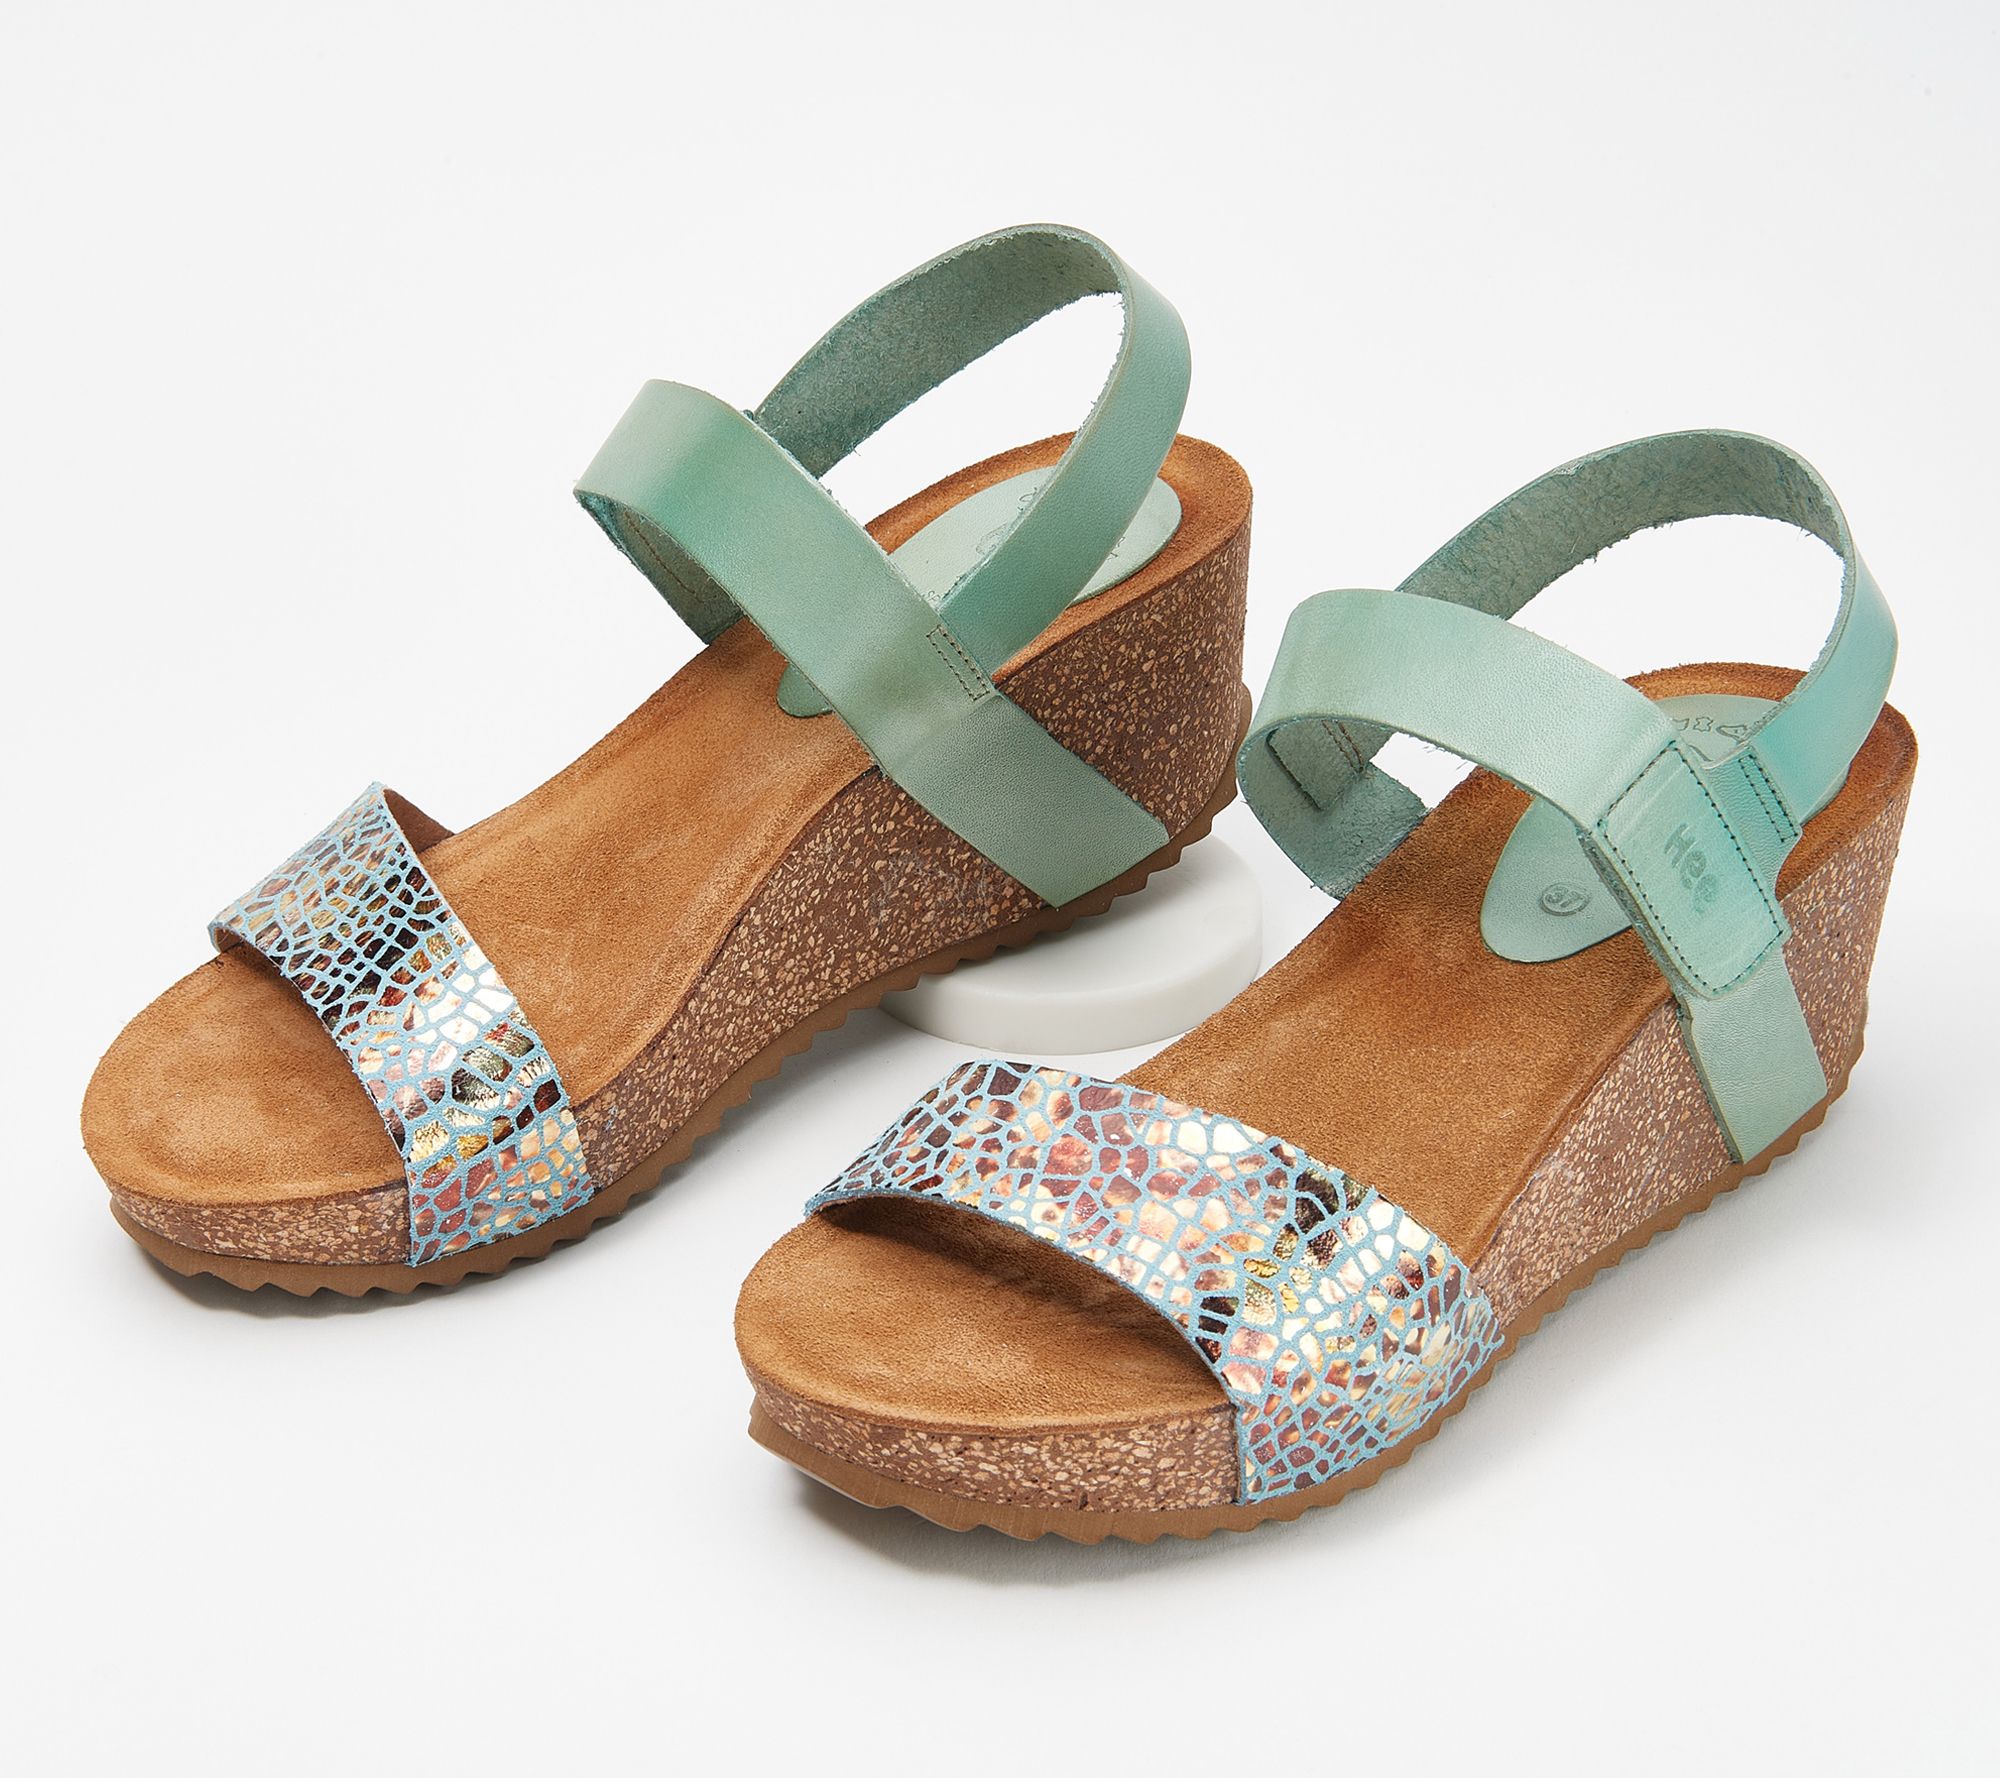 Hee Leather Adjustable Wedge Sandals - QVC.com